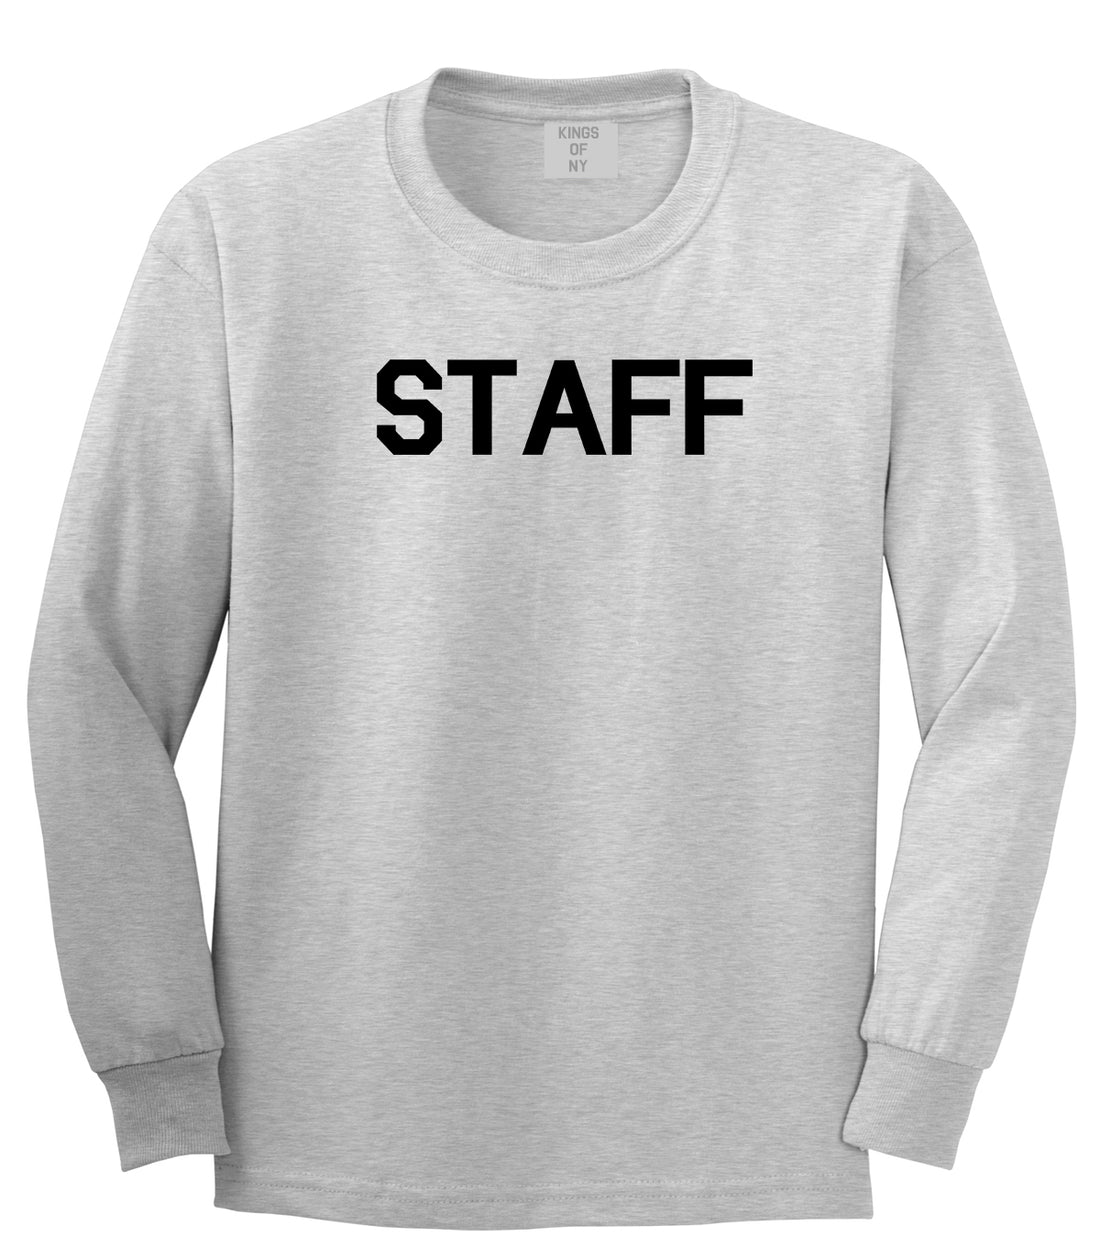 Staff Club Concert Event Mens Grey Long Sleeve T-Shirt by KINGS OF NY